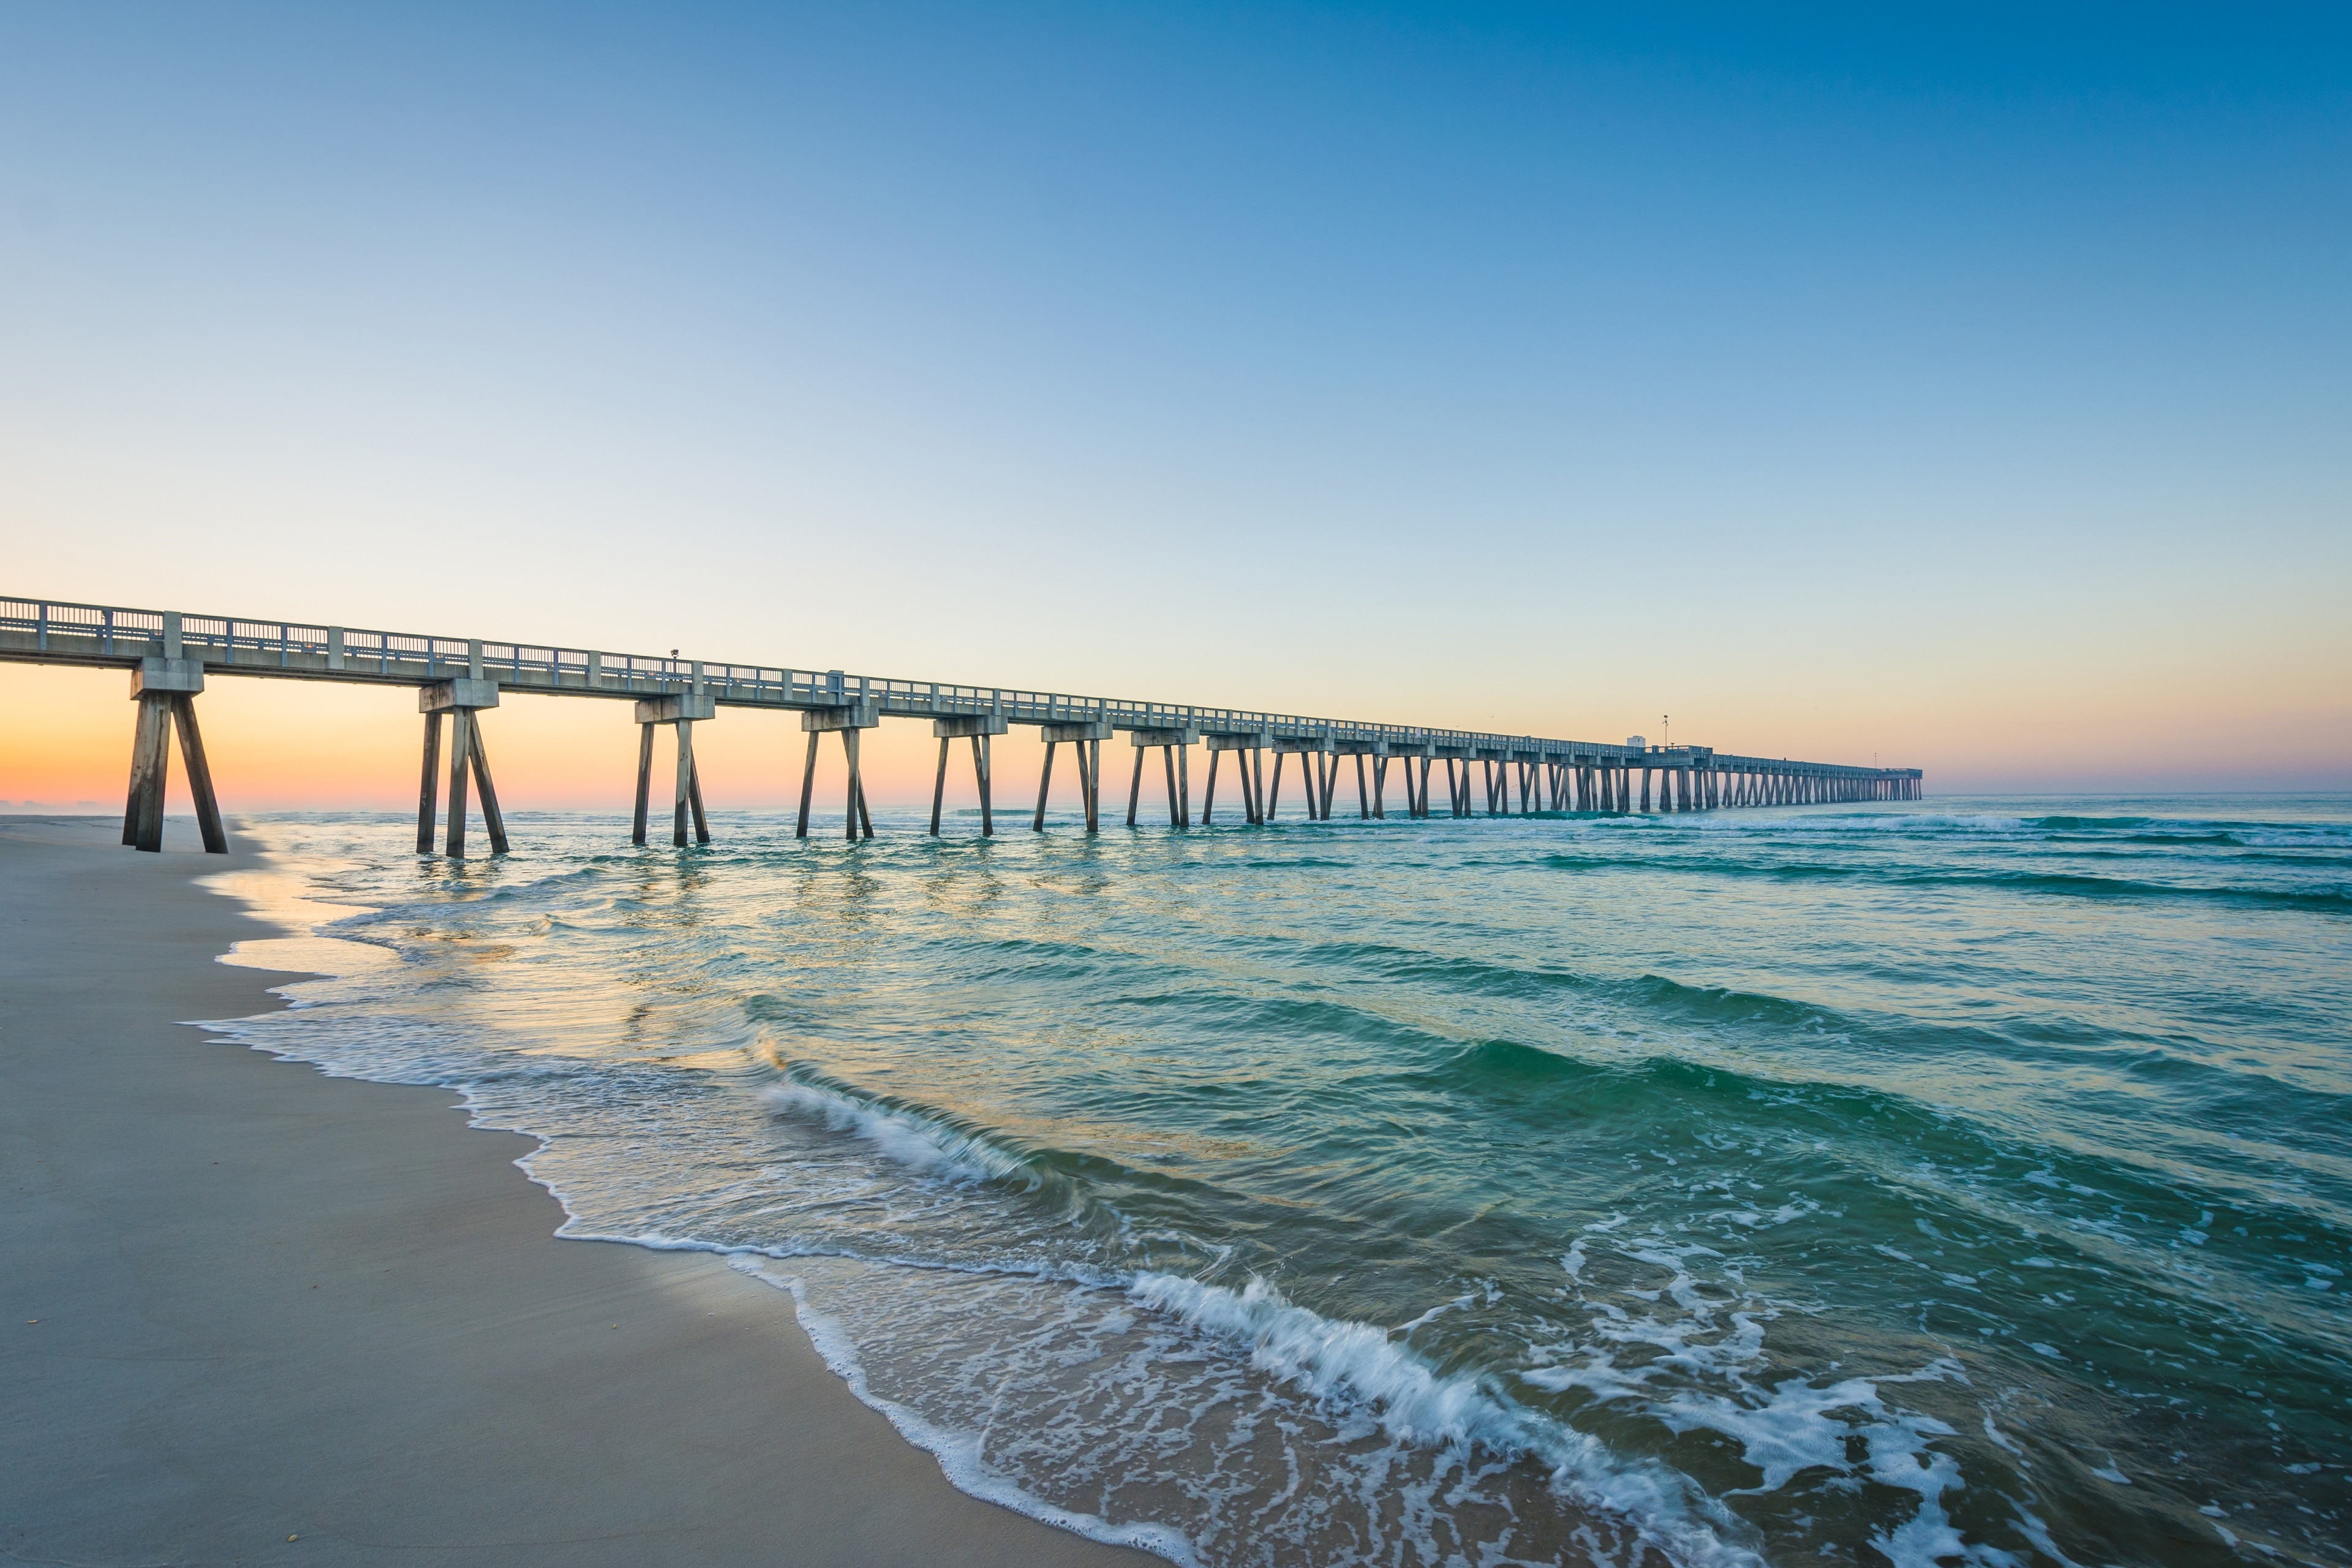 Vacation Homes near M.B. Miller County Pier, Panama City Beach: House Rentals & More | Vrbo